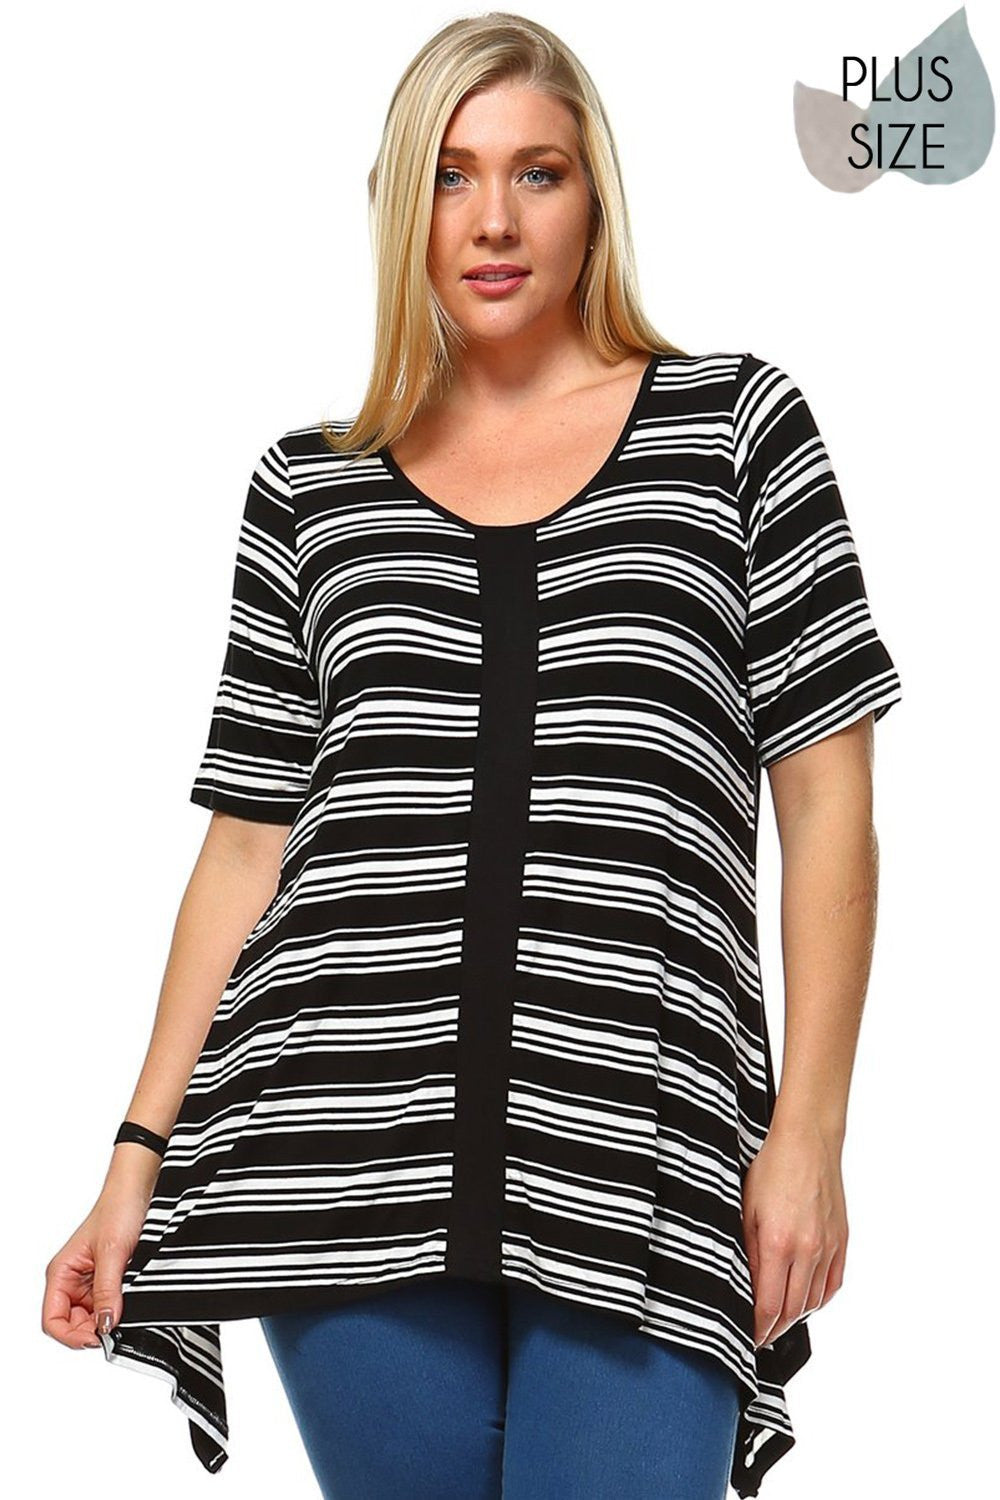 Urban x clothing-urban x apparel-boutique online-fashion district wholesale,Scoop neck Short sleeve Striped Contrast Shark bite tunic top Perfect during spring, summer,Concerts, Festivals, Dance, Brunch